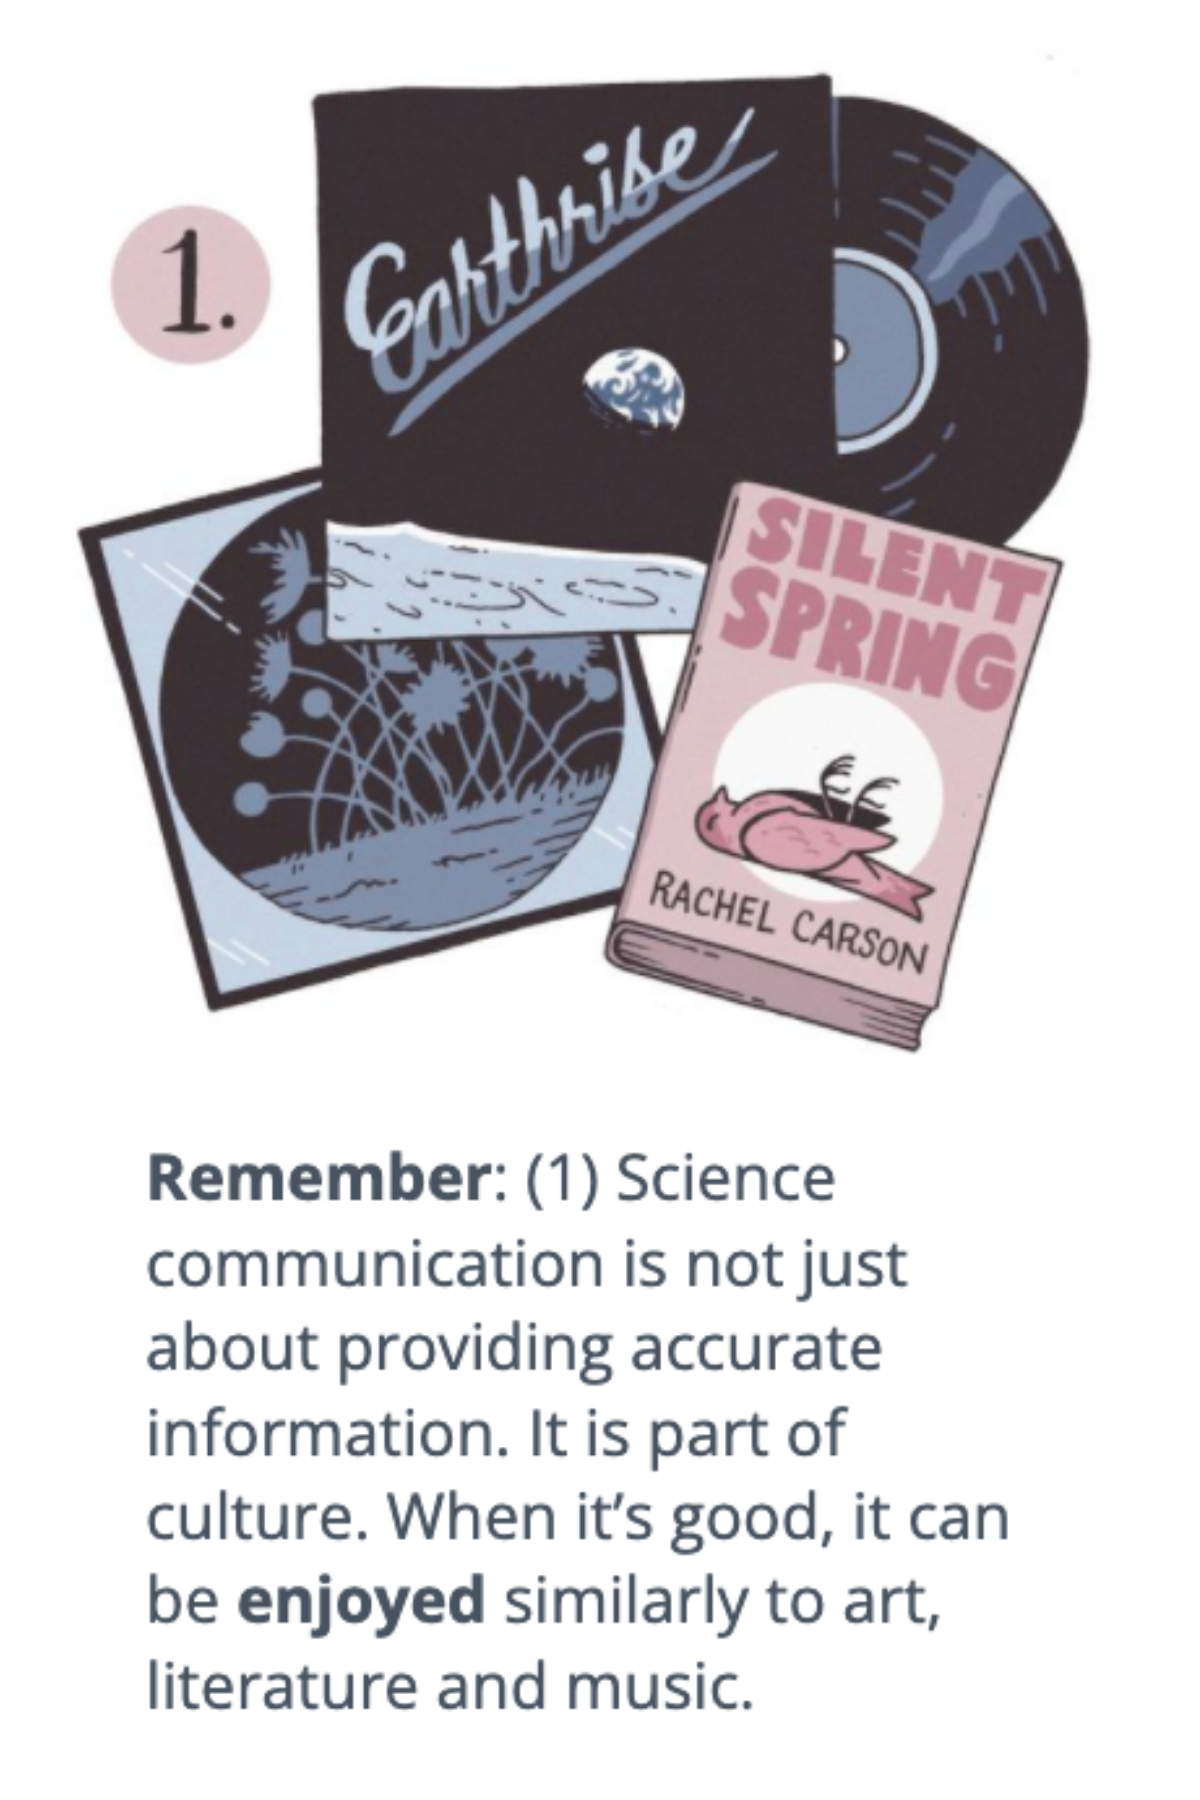 A vinyl record, an artwork and a book with the text: Remember (Tip 1) Science communication is not just about providing accurate information. It is part of culture. When it's good, it can be enjoyed similarly to art literature and music.